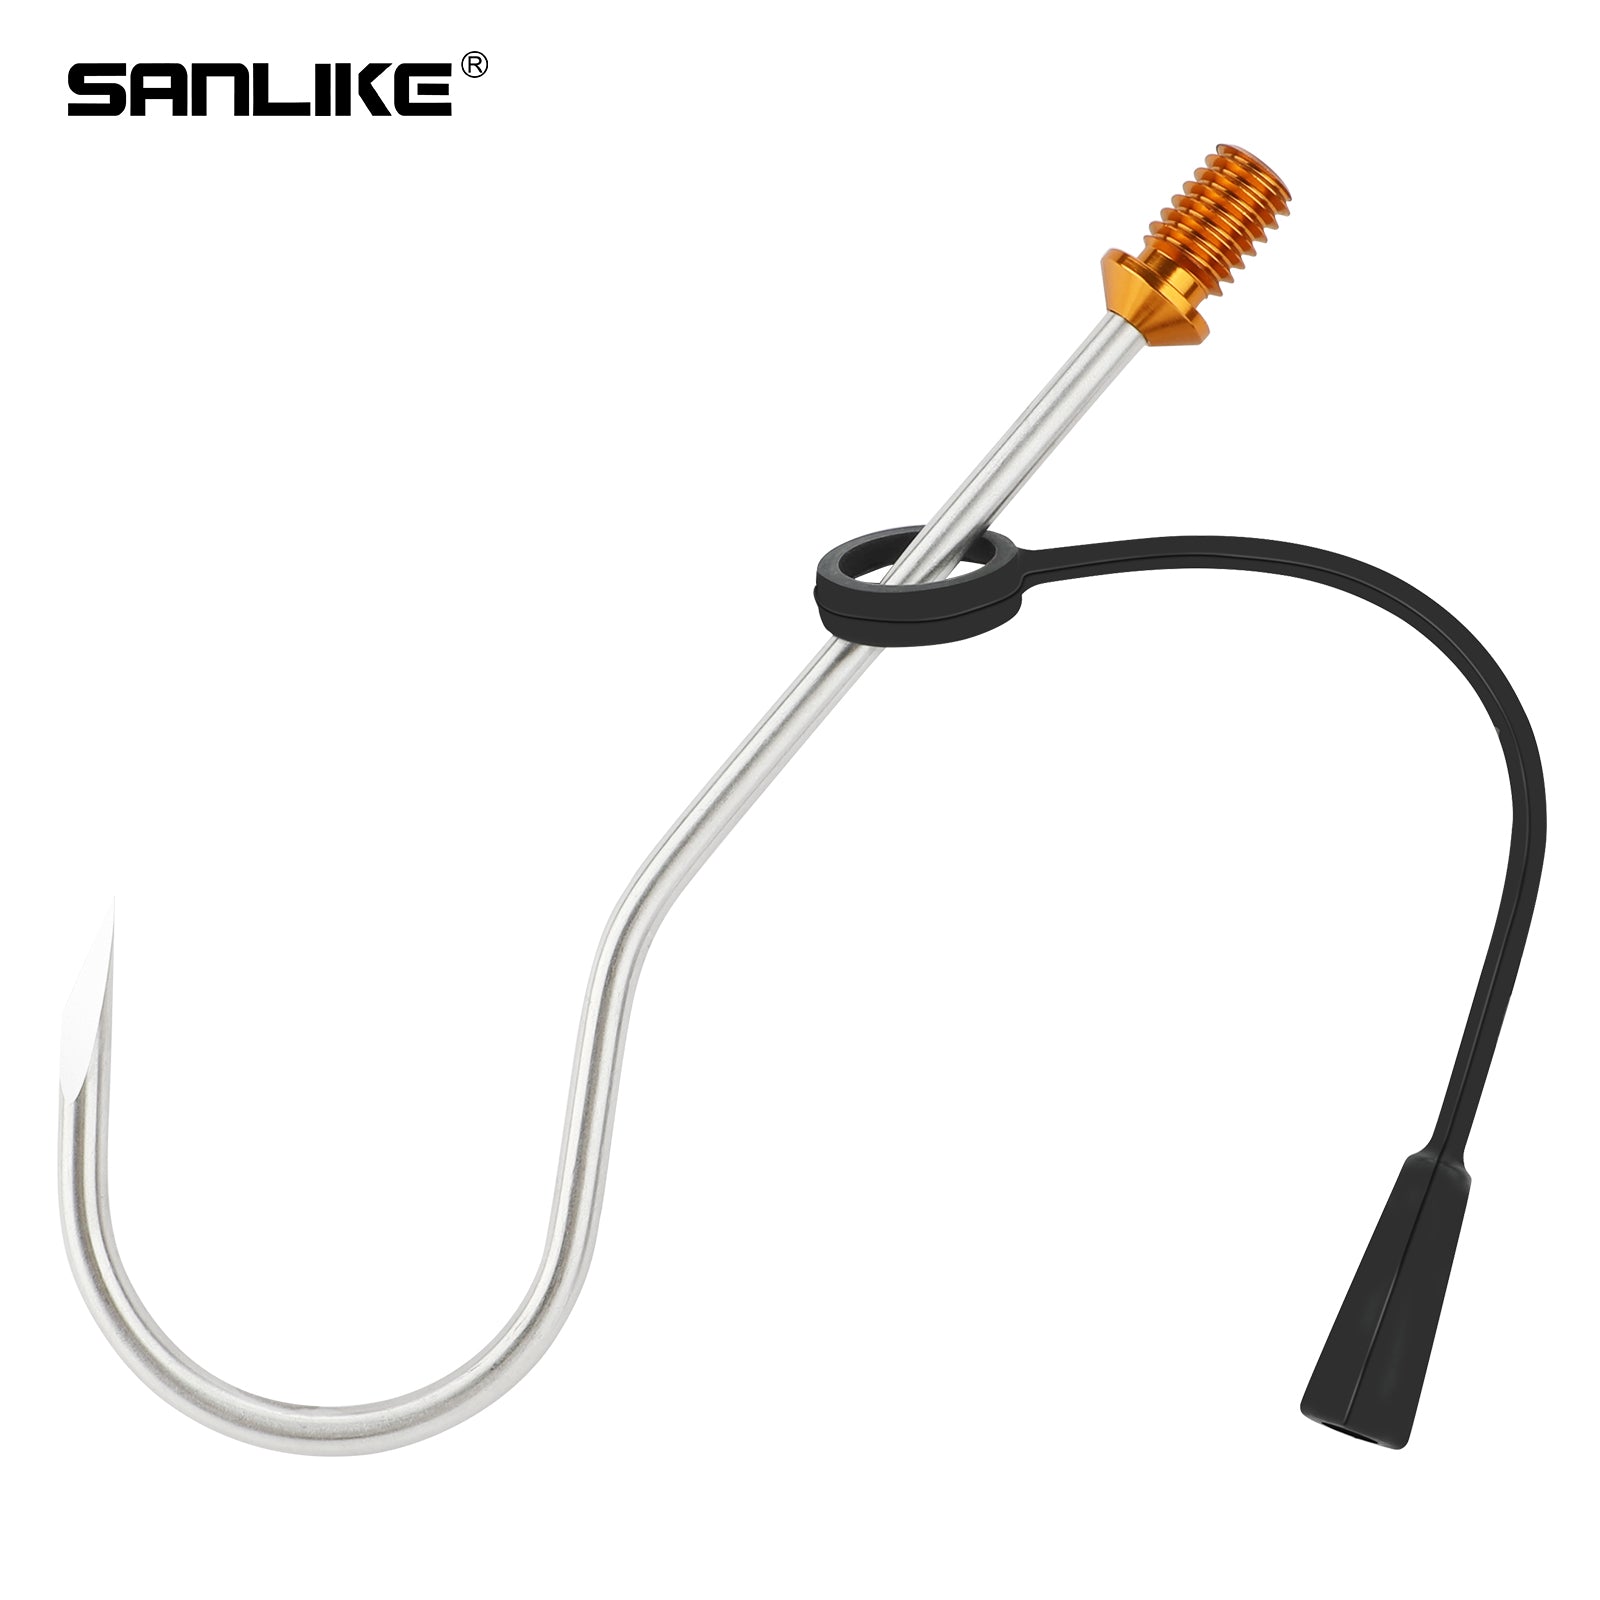  SANLIKE Fishing Gaff Fishing Hook - Stainless Steel Extra  Strong Sharp Fishing Gaff Hook for Saltwater Freshwater Fishing with  Protection Cover : Sports & Outdoors